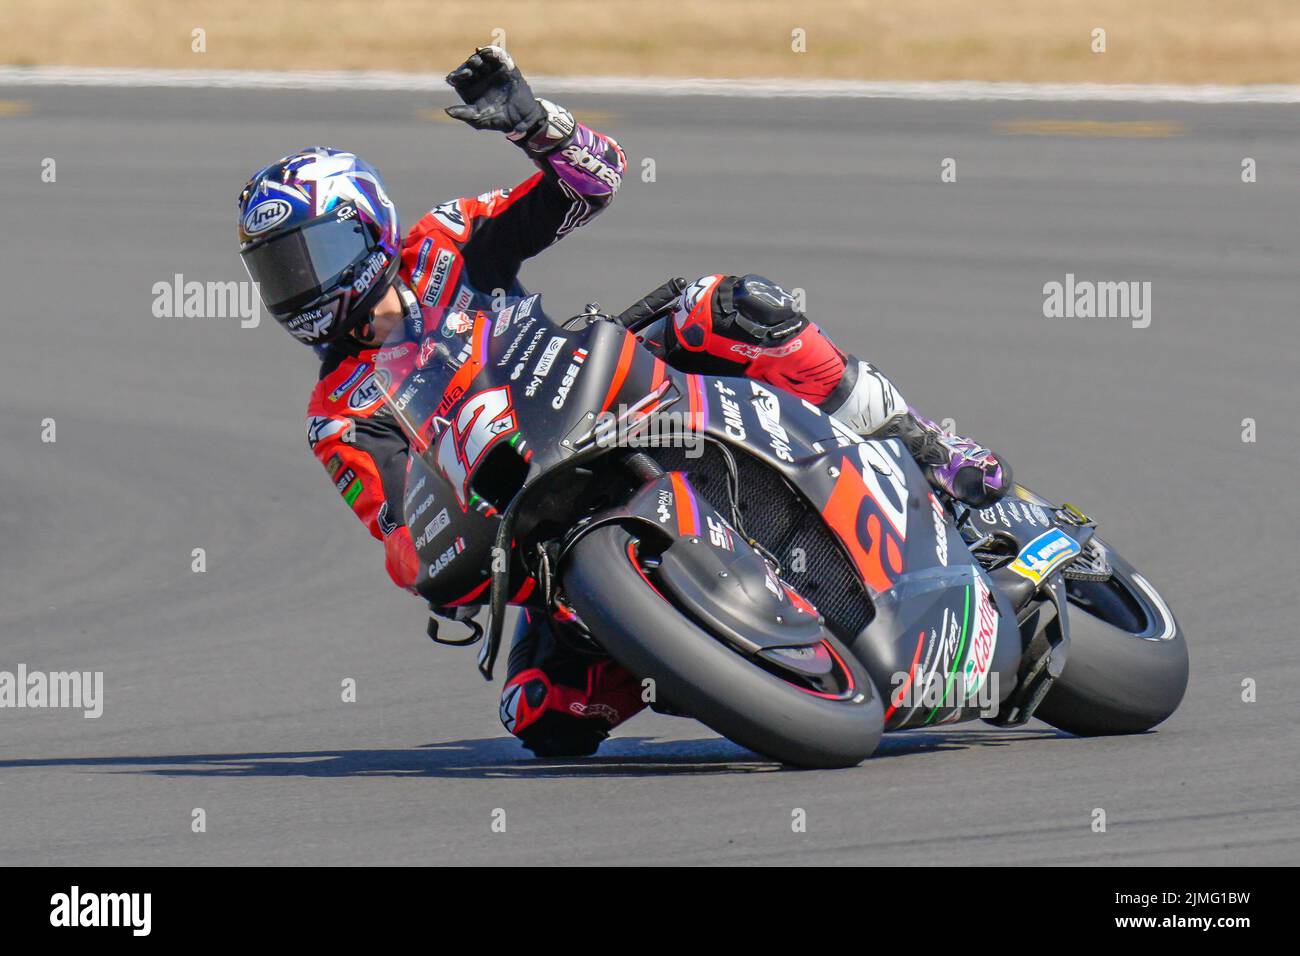 Towcester, UK. 06th Aug, 2022. Maverick VINALES (Spain) of the Aprilia Racing Team after securing second place on the grid during the 2022 Monster Energy Grand Prix MotoGP Qualifying sessions at Silverstone Circuit, Towcester, England on the 6th August 2022. Photo by David Horn. Credit: PRiME Media Images/Alamy Live News Stock Photo